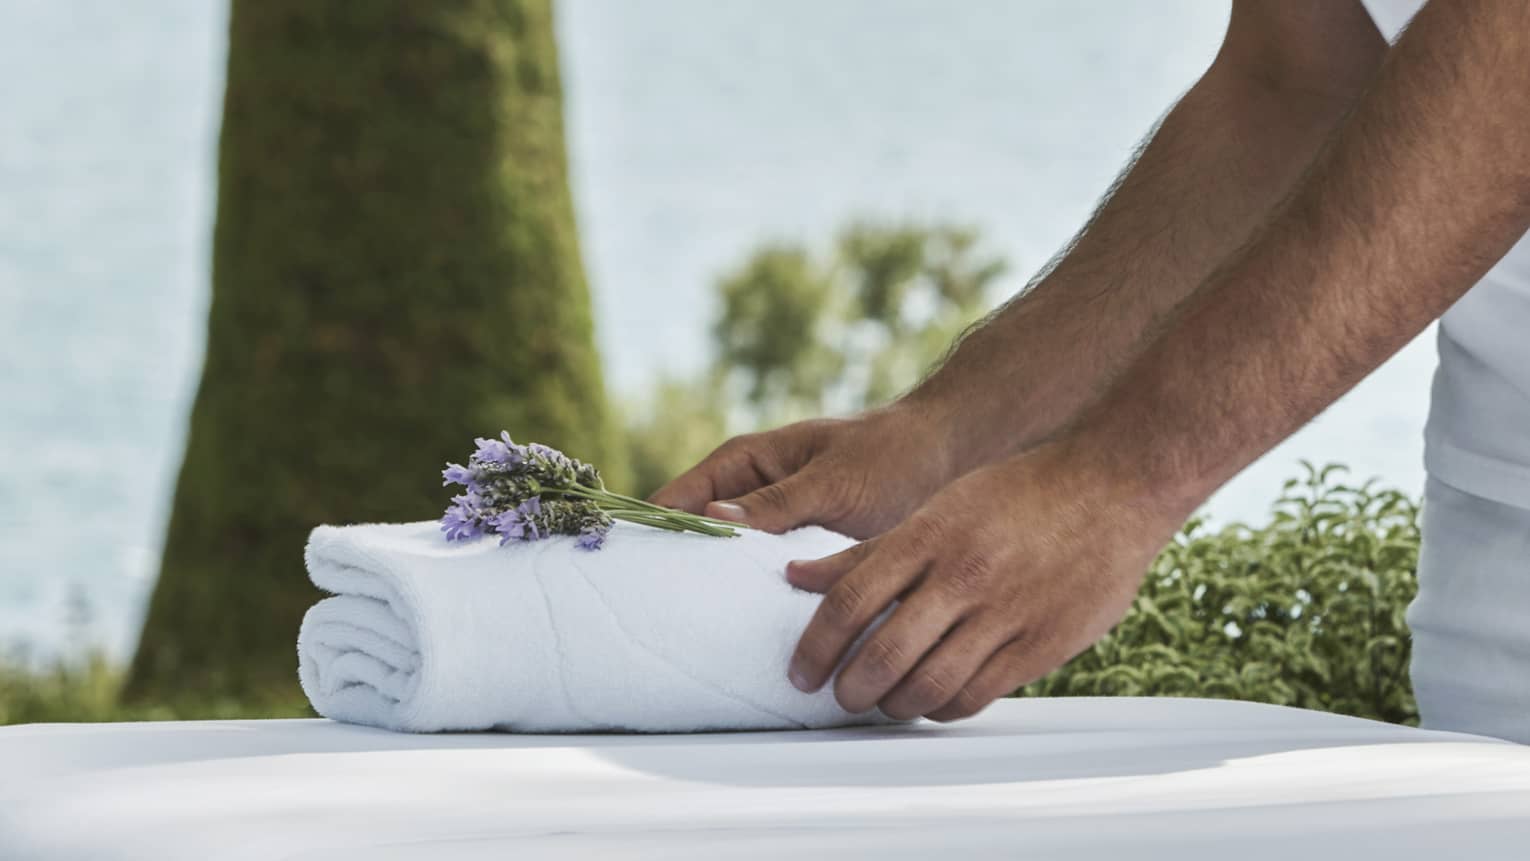 Close-up of hands setting on folded white towel with lavender sprig